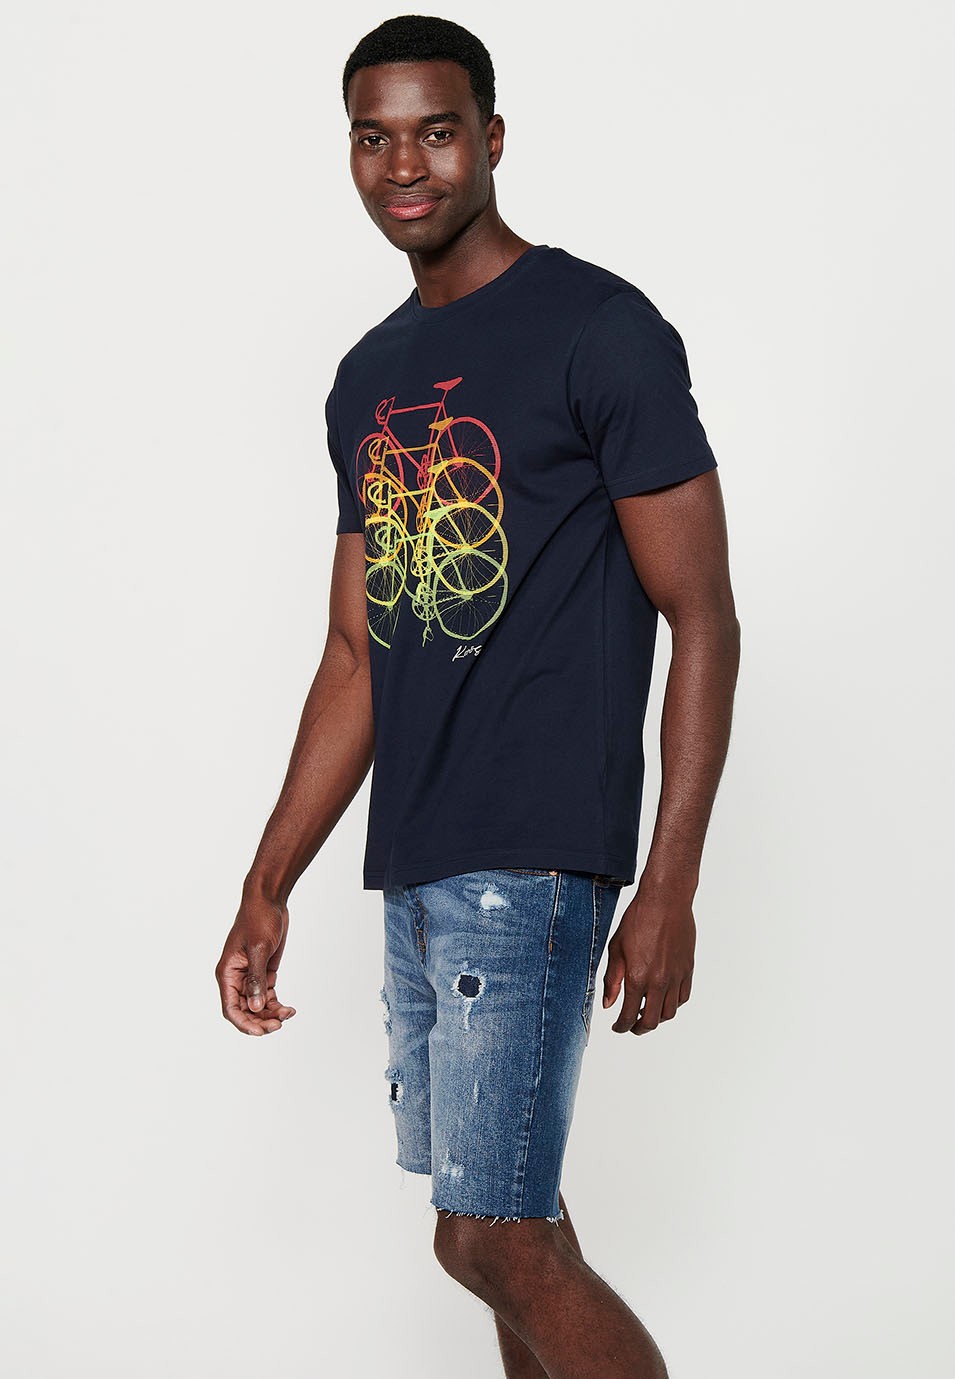 Short-sleeved cotton T-shirt with bicycle front print, navy color for men 3